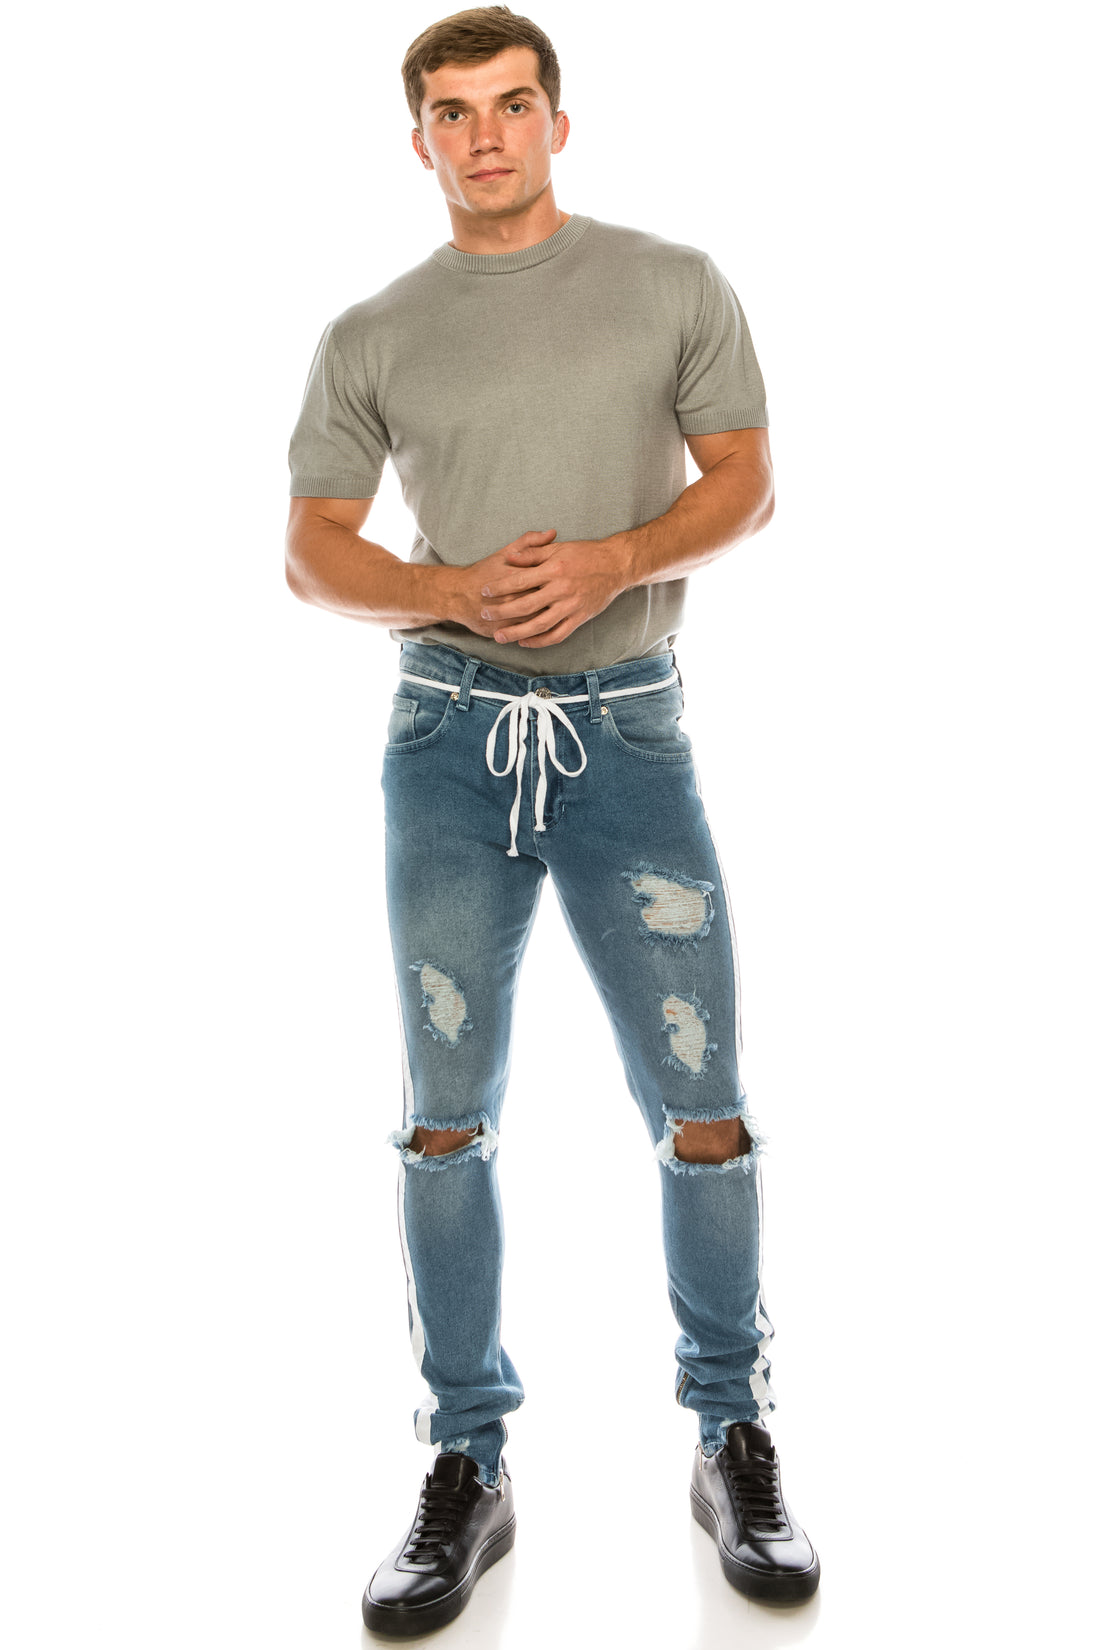 SKINNY FIT DISTRESSED LIGHT BLUE TRACK JEANS - Ron Tomson